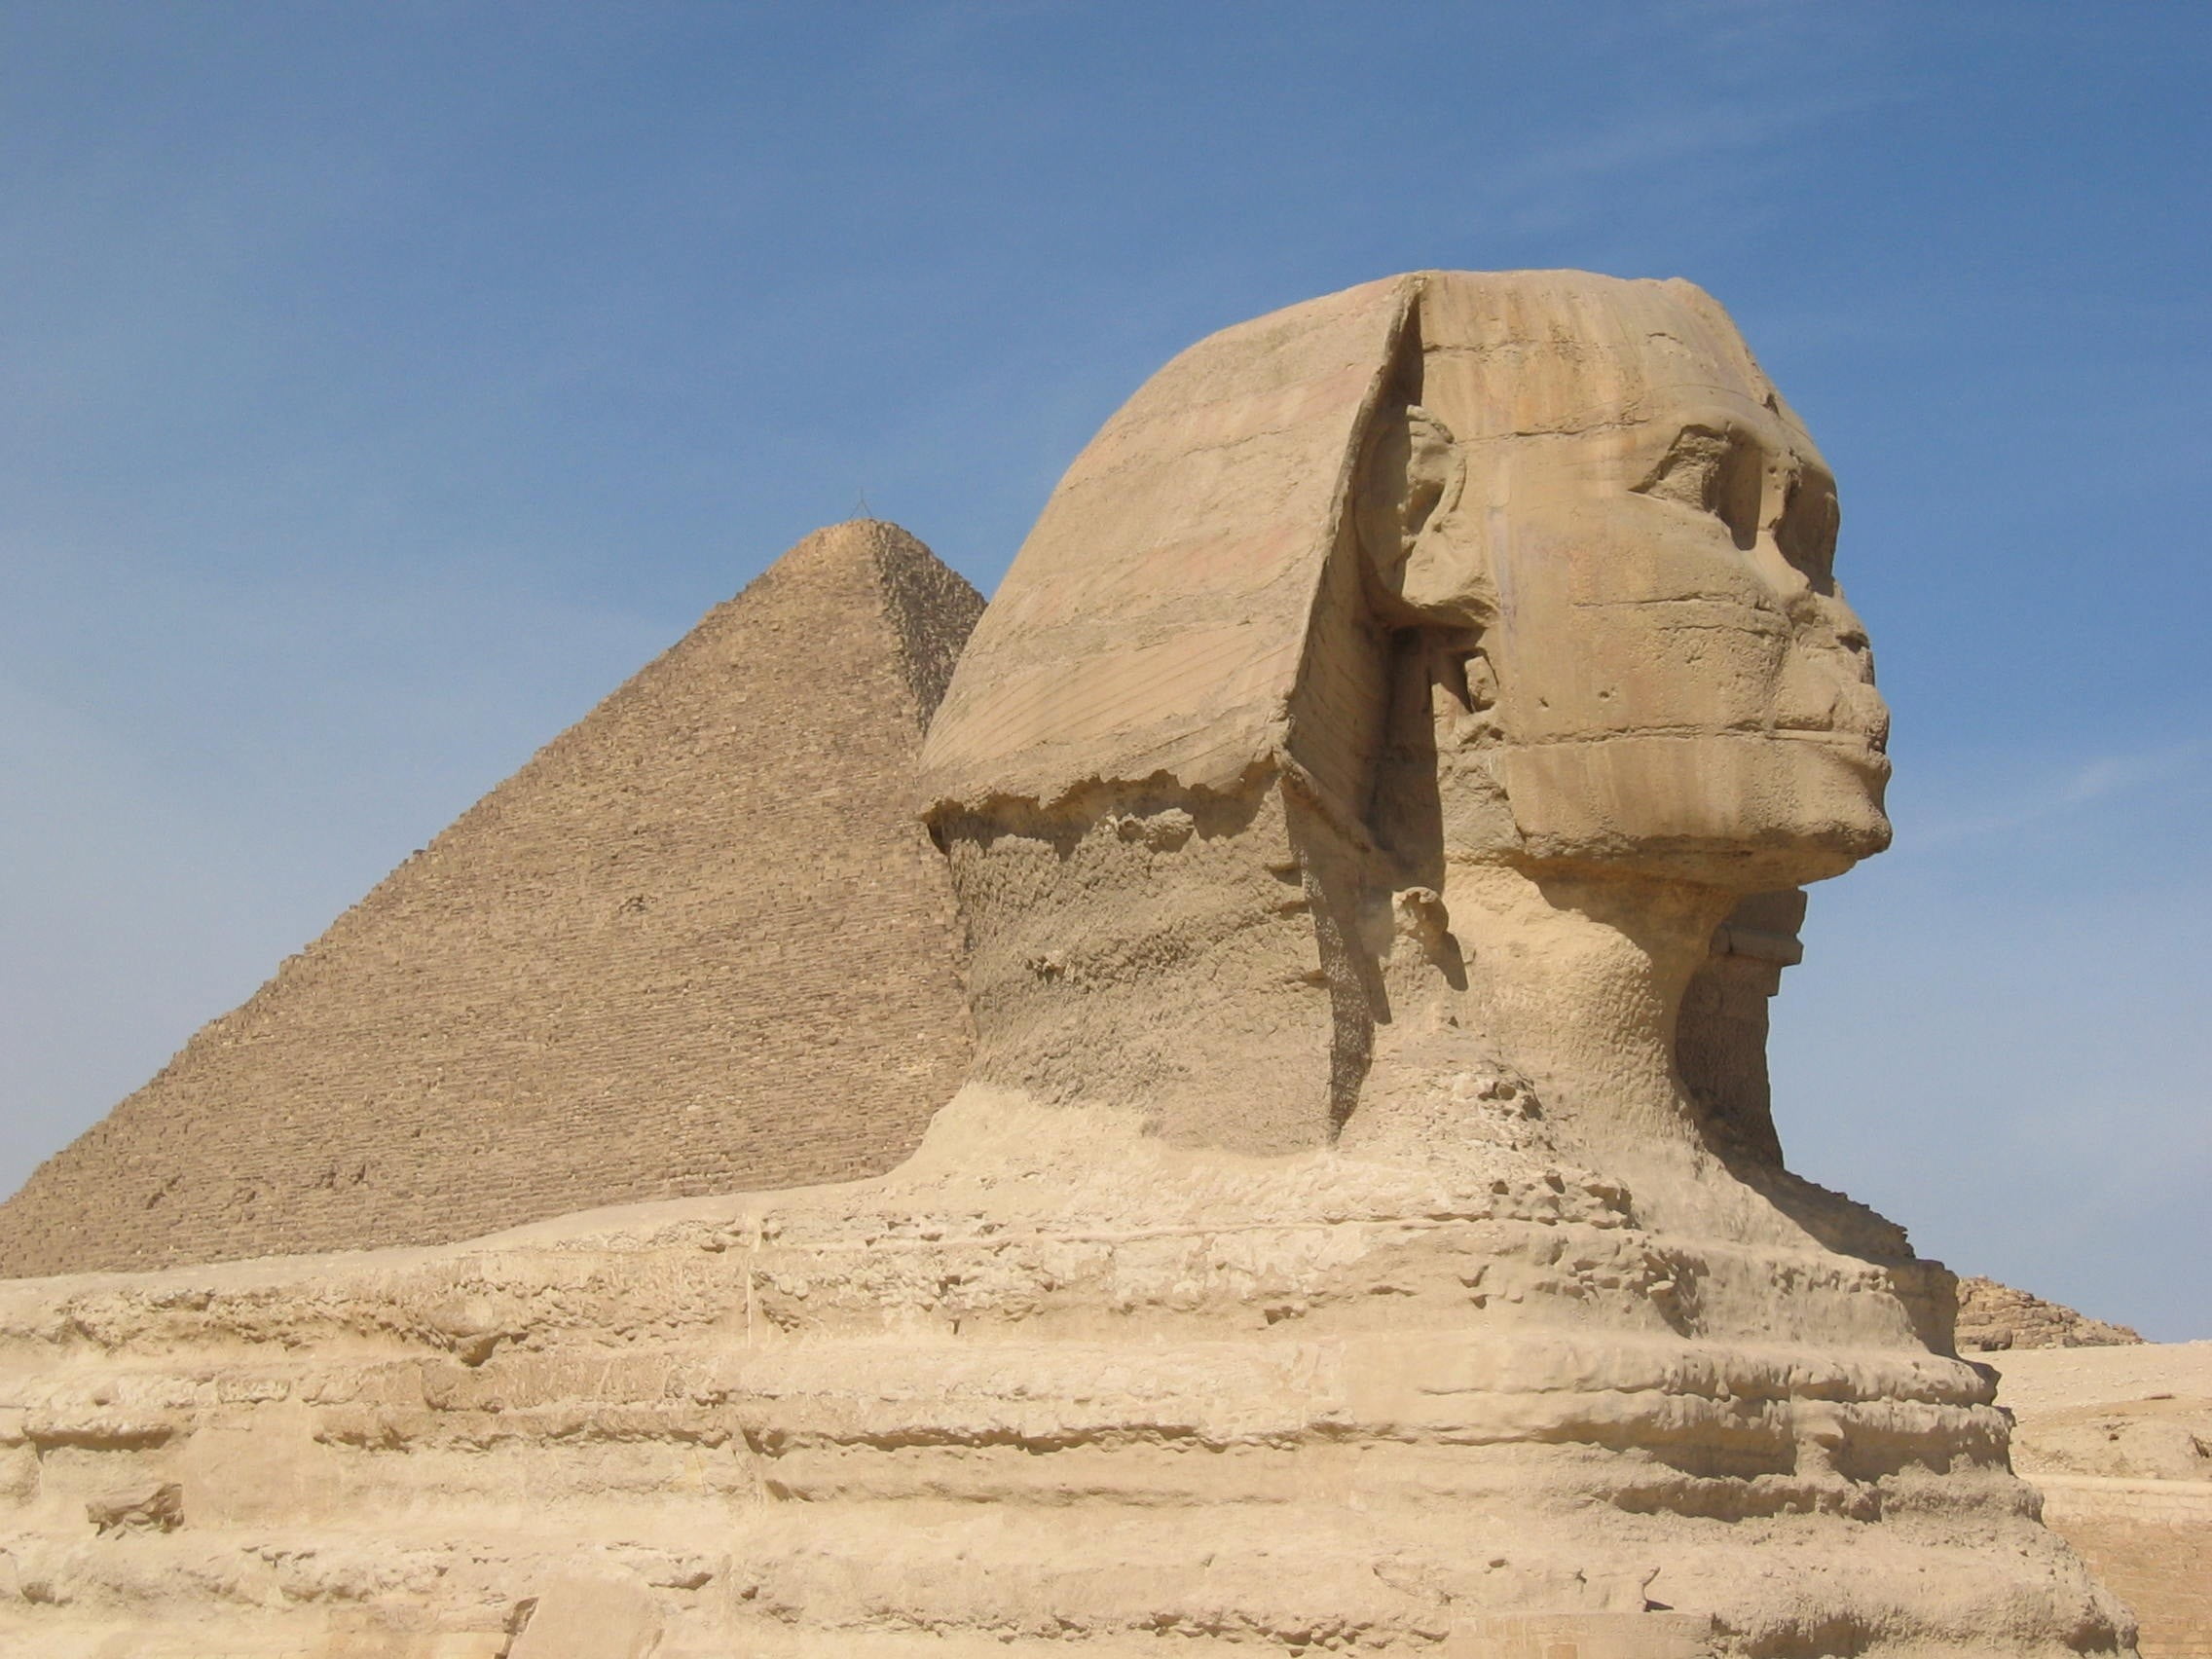 The Great Sphinx of Giza, Egypt, landscape, sphinx, pyramid, Egypt